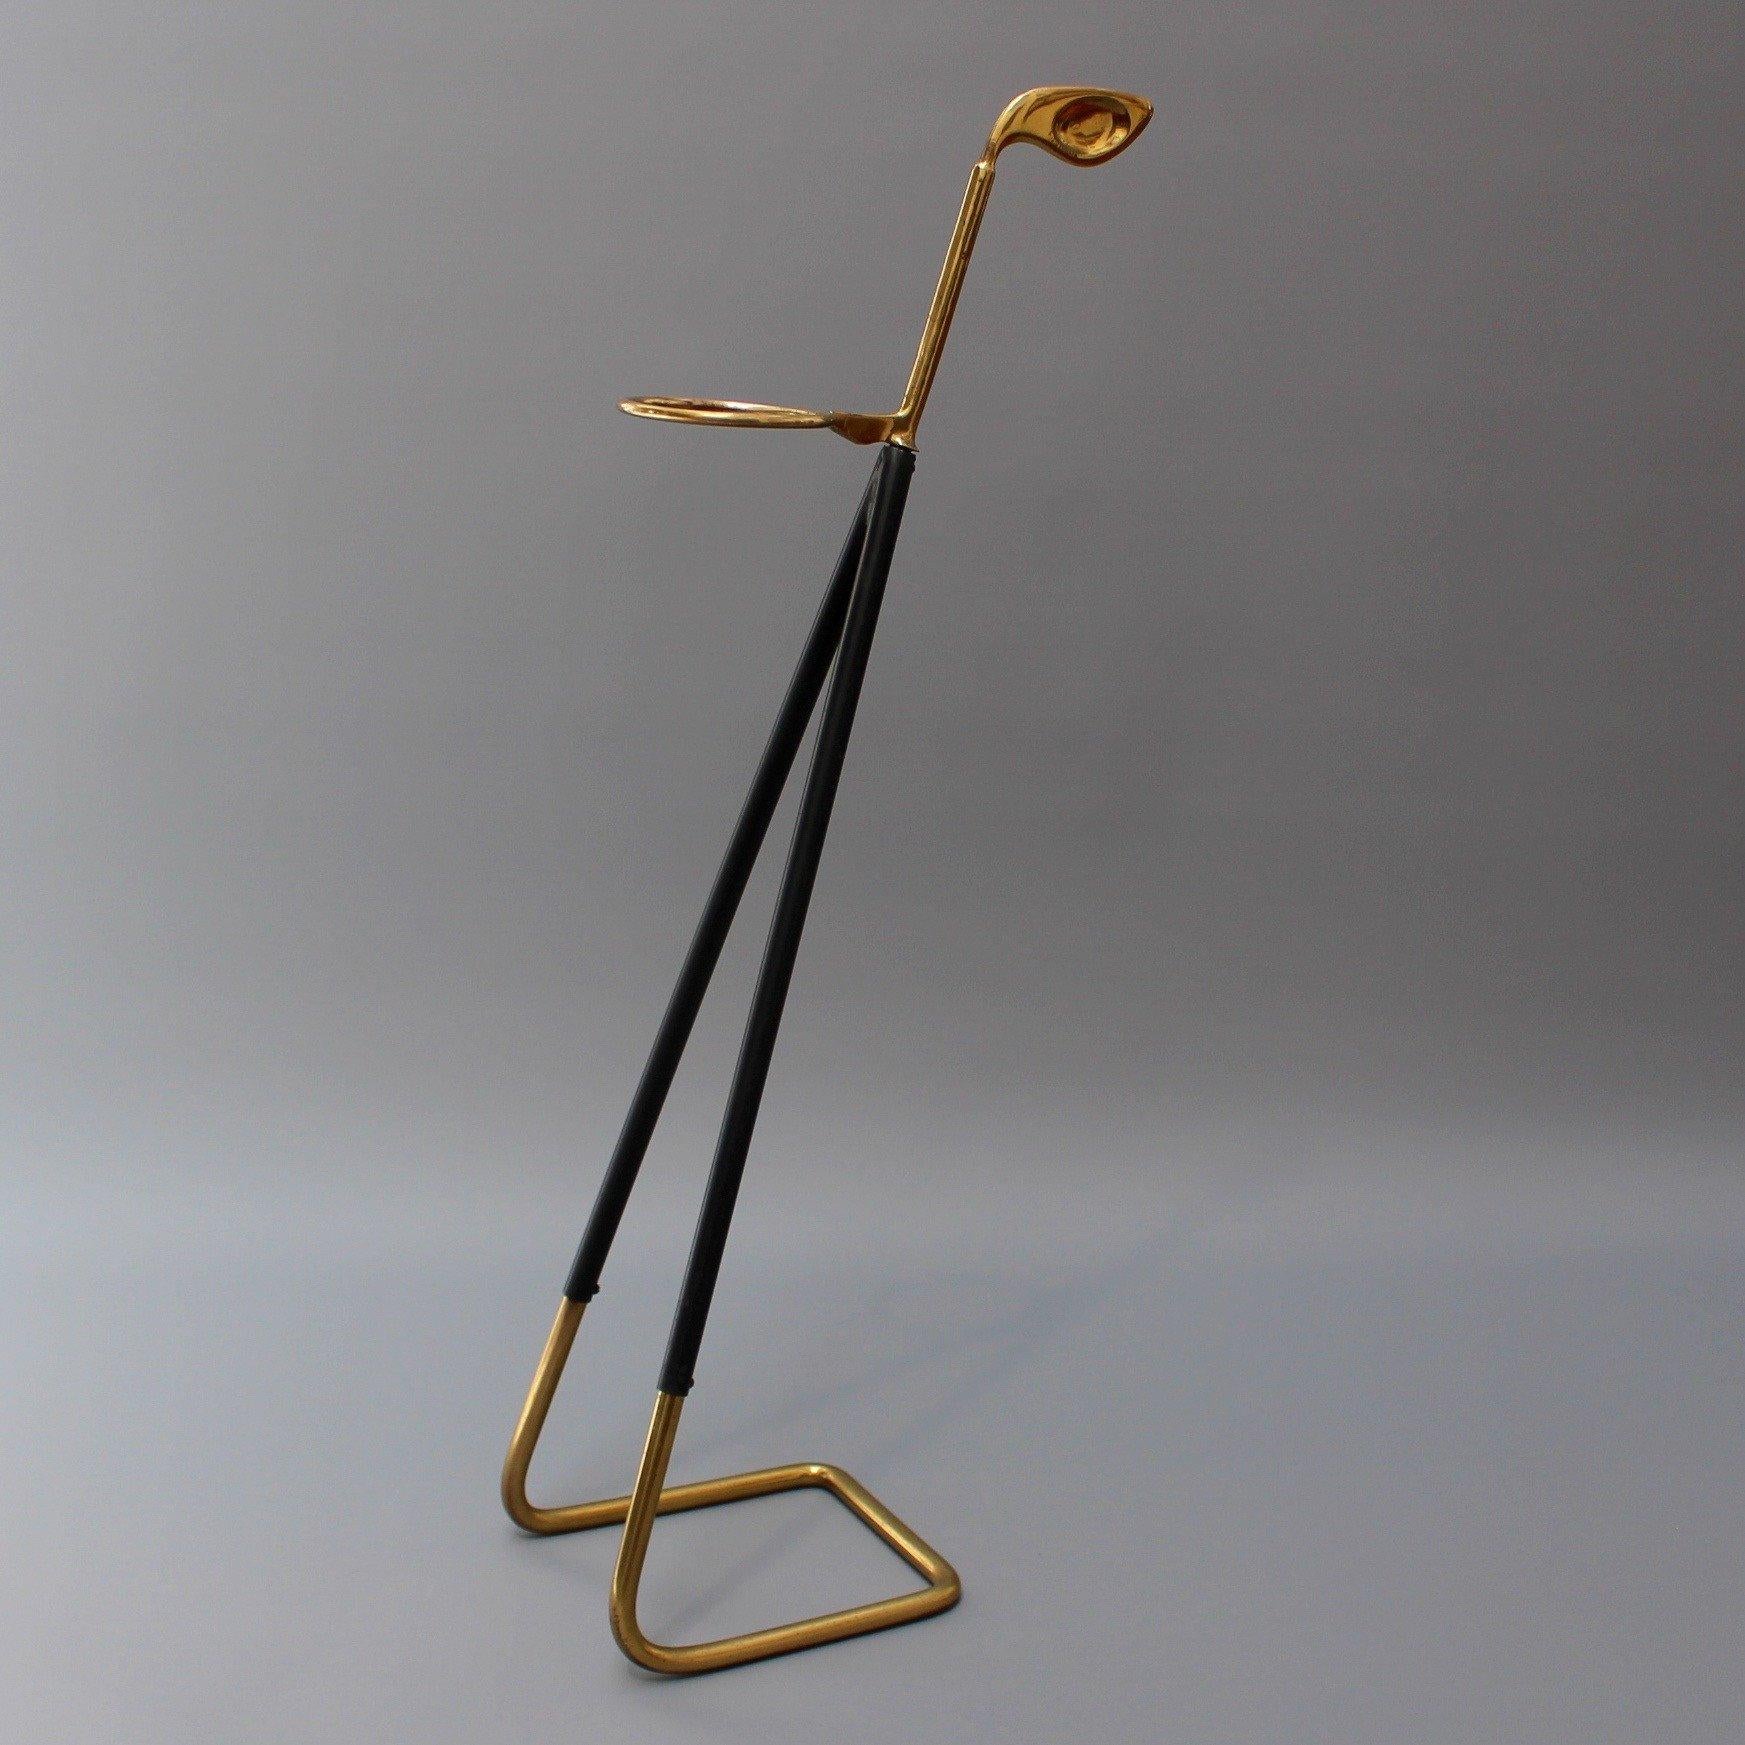 Italian midcentury golf club-shaped walking stick or umbrella stand (circa 1950s). The stylish brass and black metallic tubular structure is angled in its stature - a perfect and incredibly unique piece so of the Italian 1950s. This is a